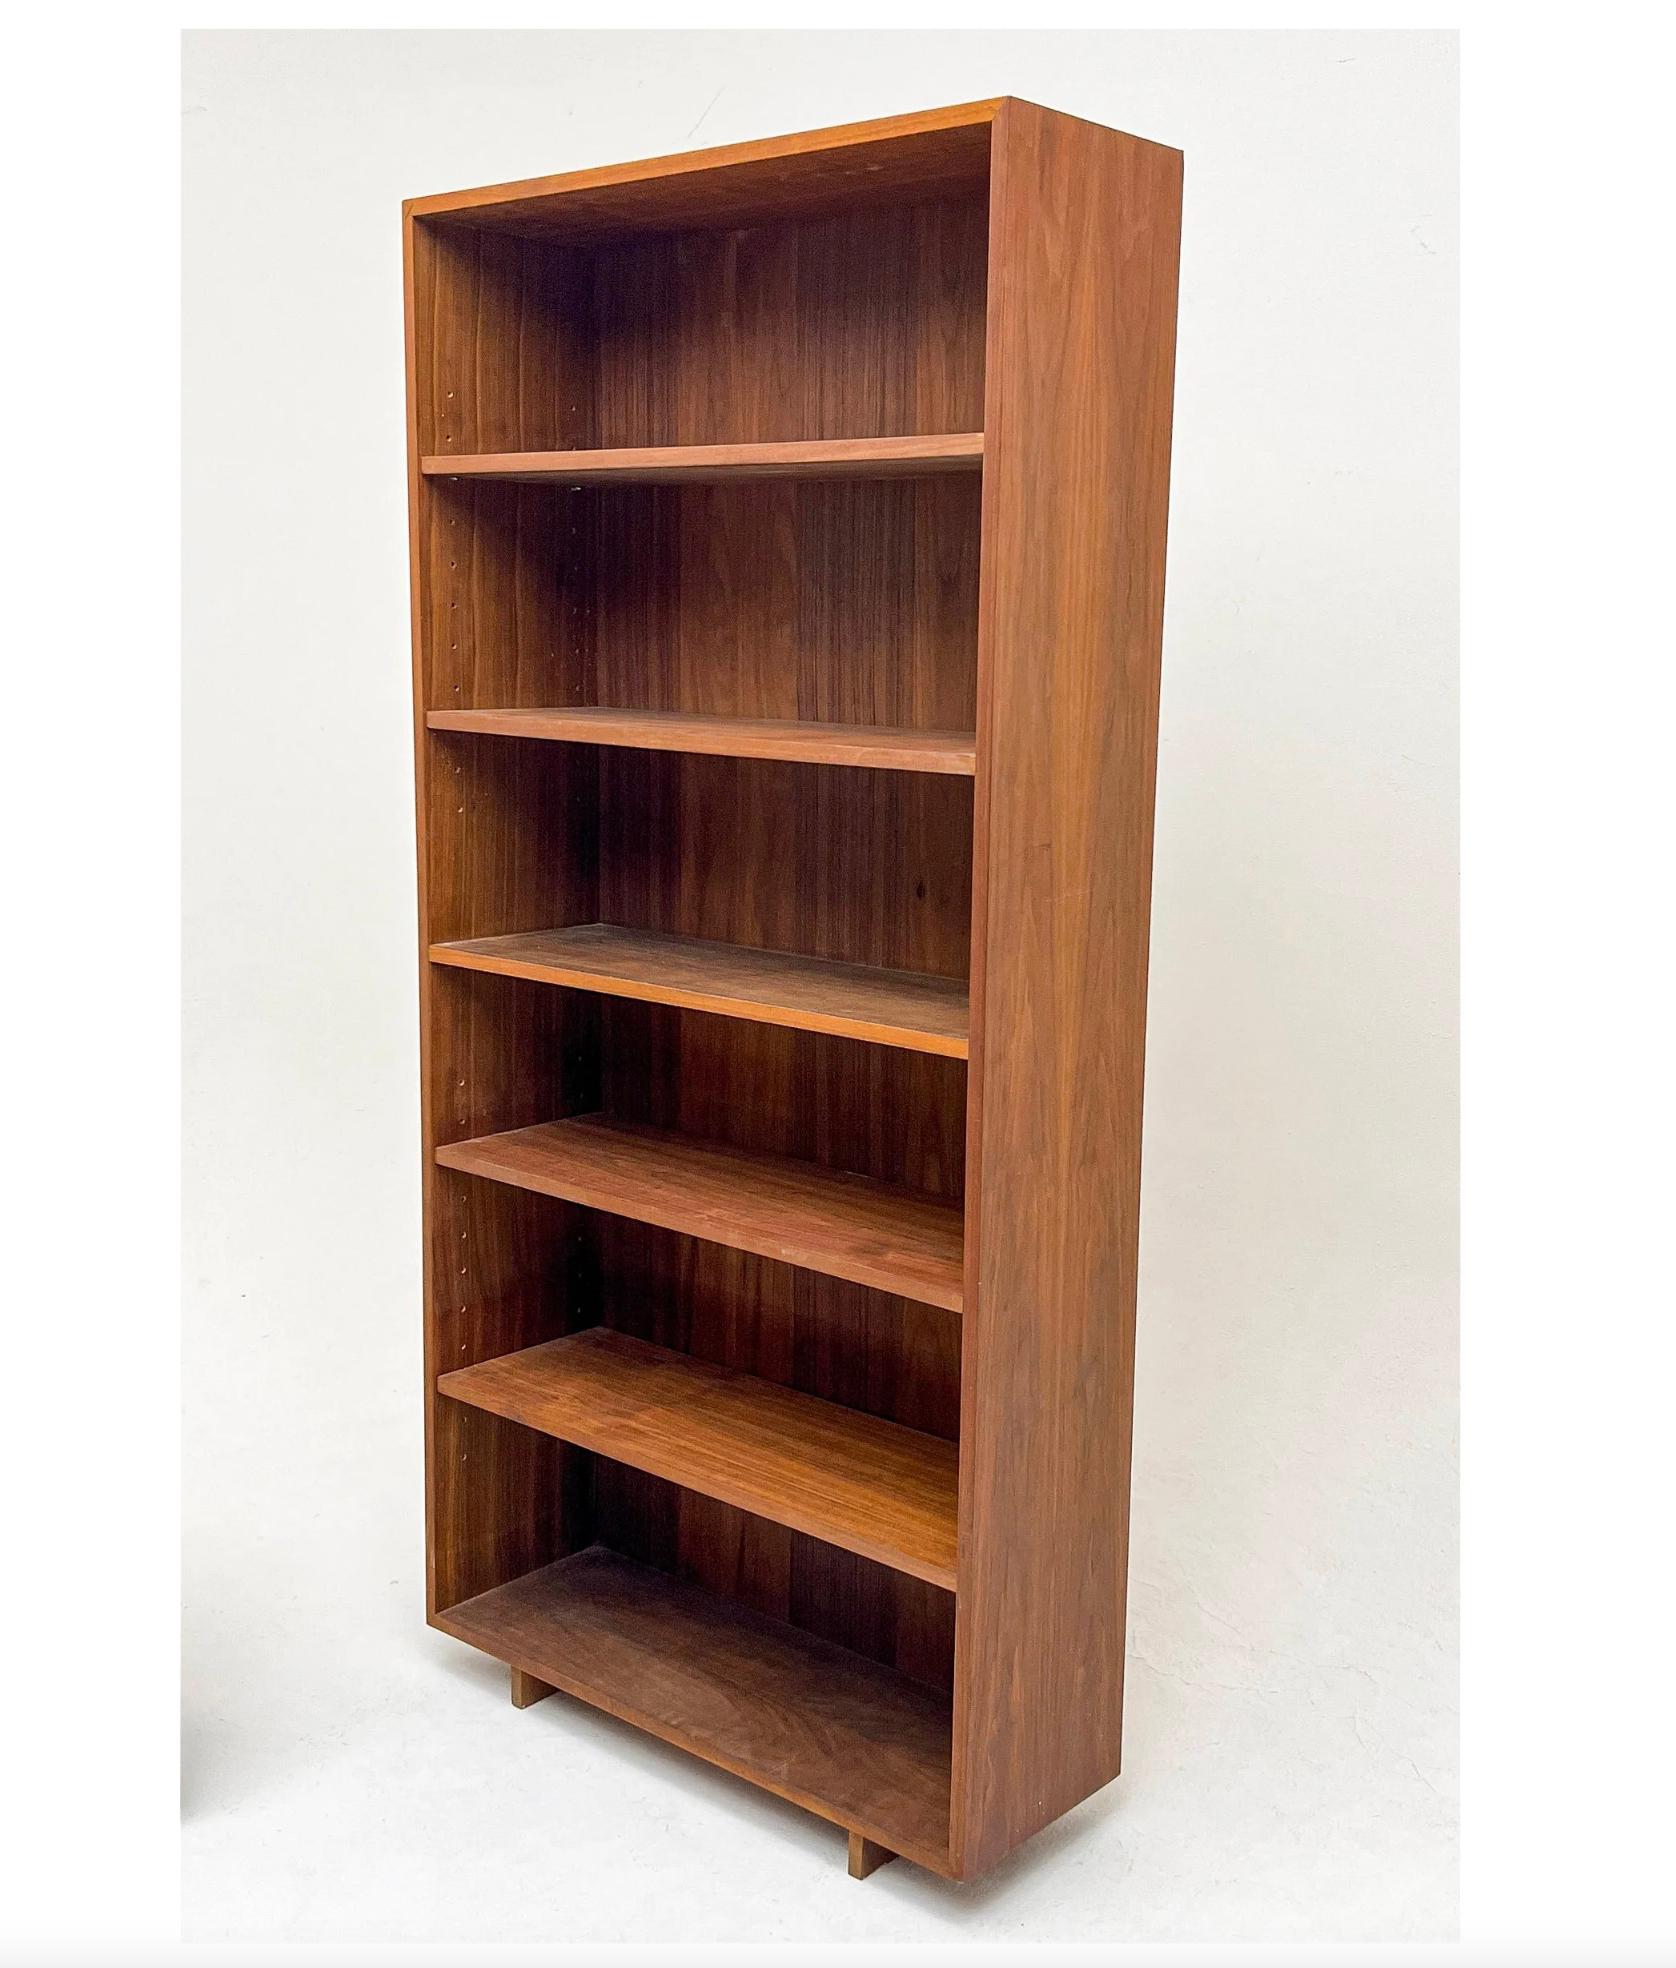 Mid century American Studio craft Richard Artschwager 6 shelf walnut tall bookcase with adjustable shelves. Good vintage condition with beautiful walnut wood grains. Has 2 horizontal wood legs appears to float. clean inside and out with wood joint